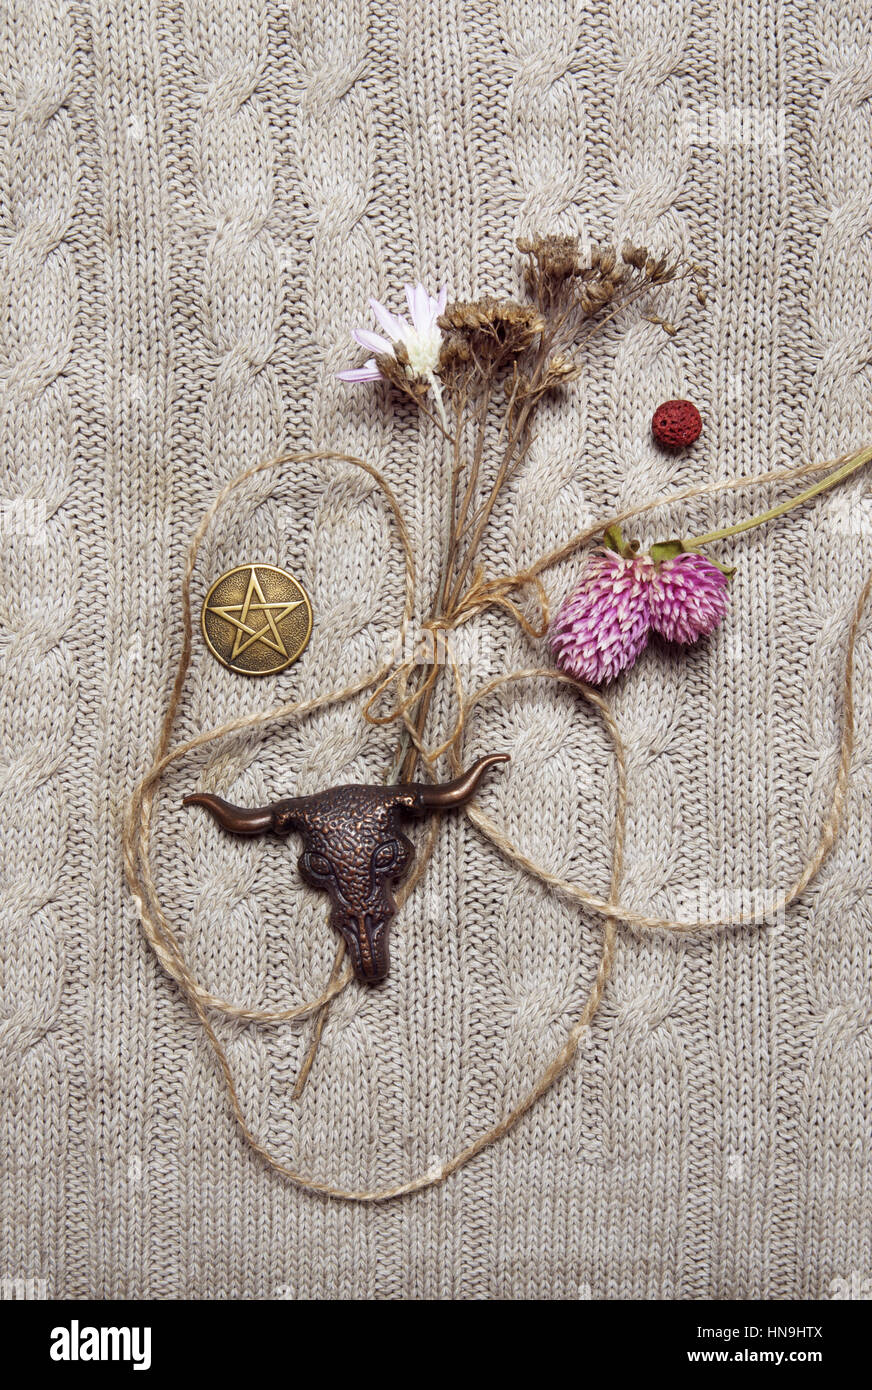 Composition with pressed flowers, pentacle and skull amulet Stock Photo